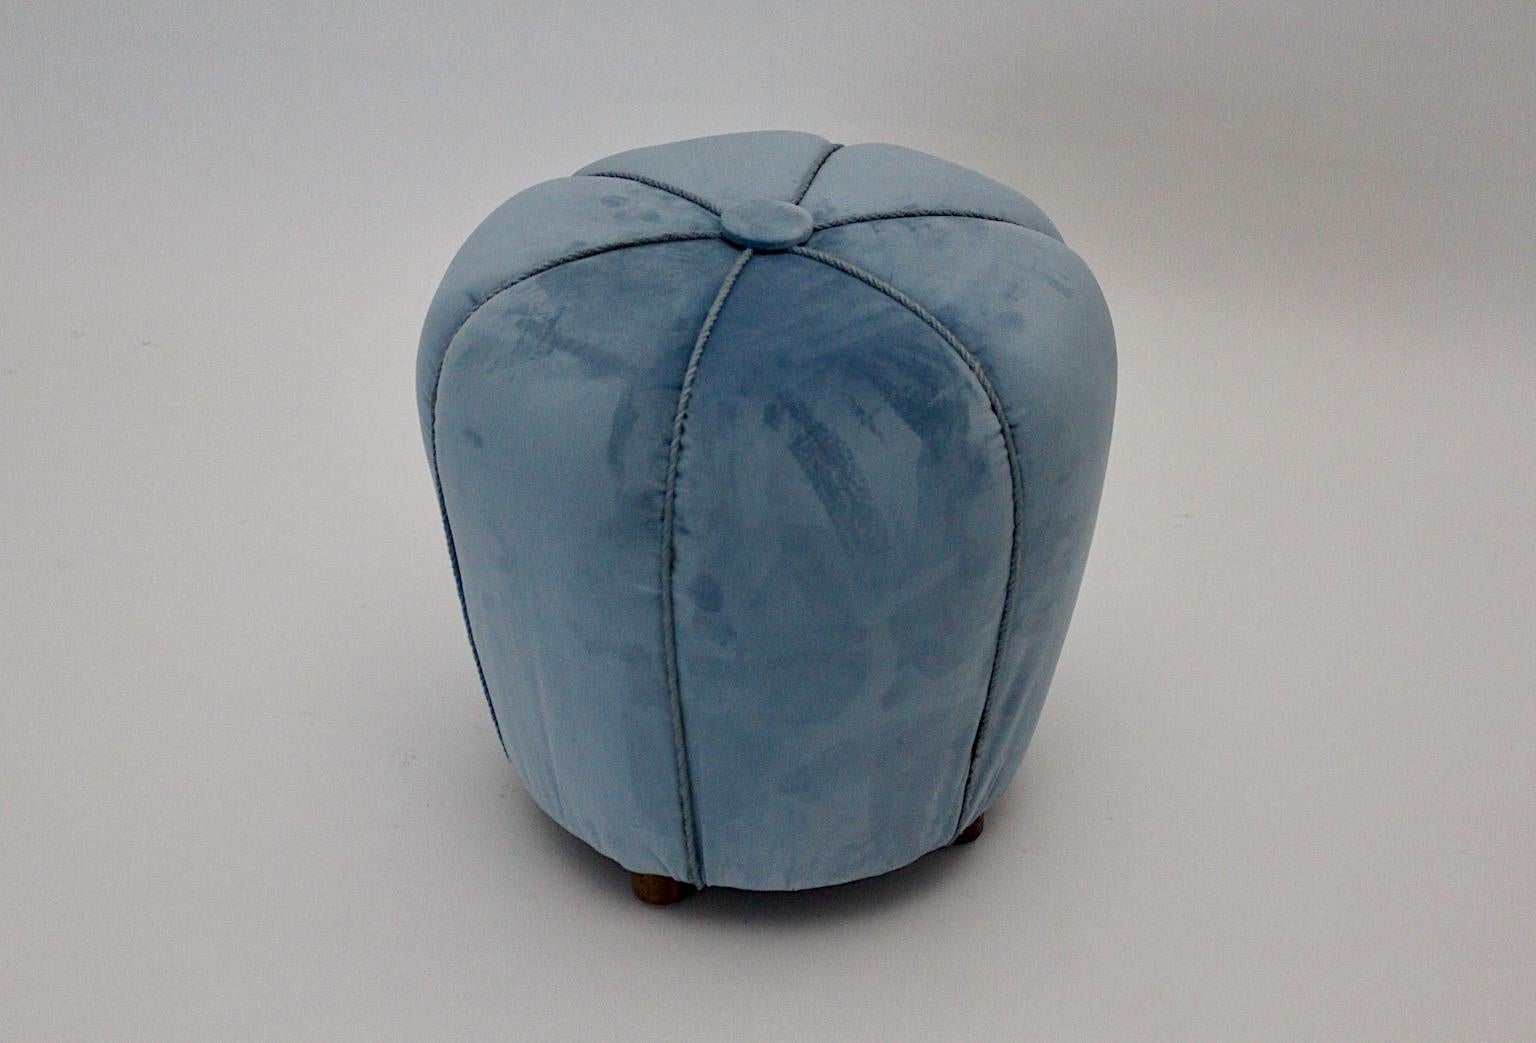 Art Deco vintage pouf stool ottoman with walnut feet reupholstered in blue velvet fabric and blue cords.
Through the stunning shape and the blue pastel color tone the pouf or stool could be a graceful point in your environment.
Very good